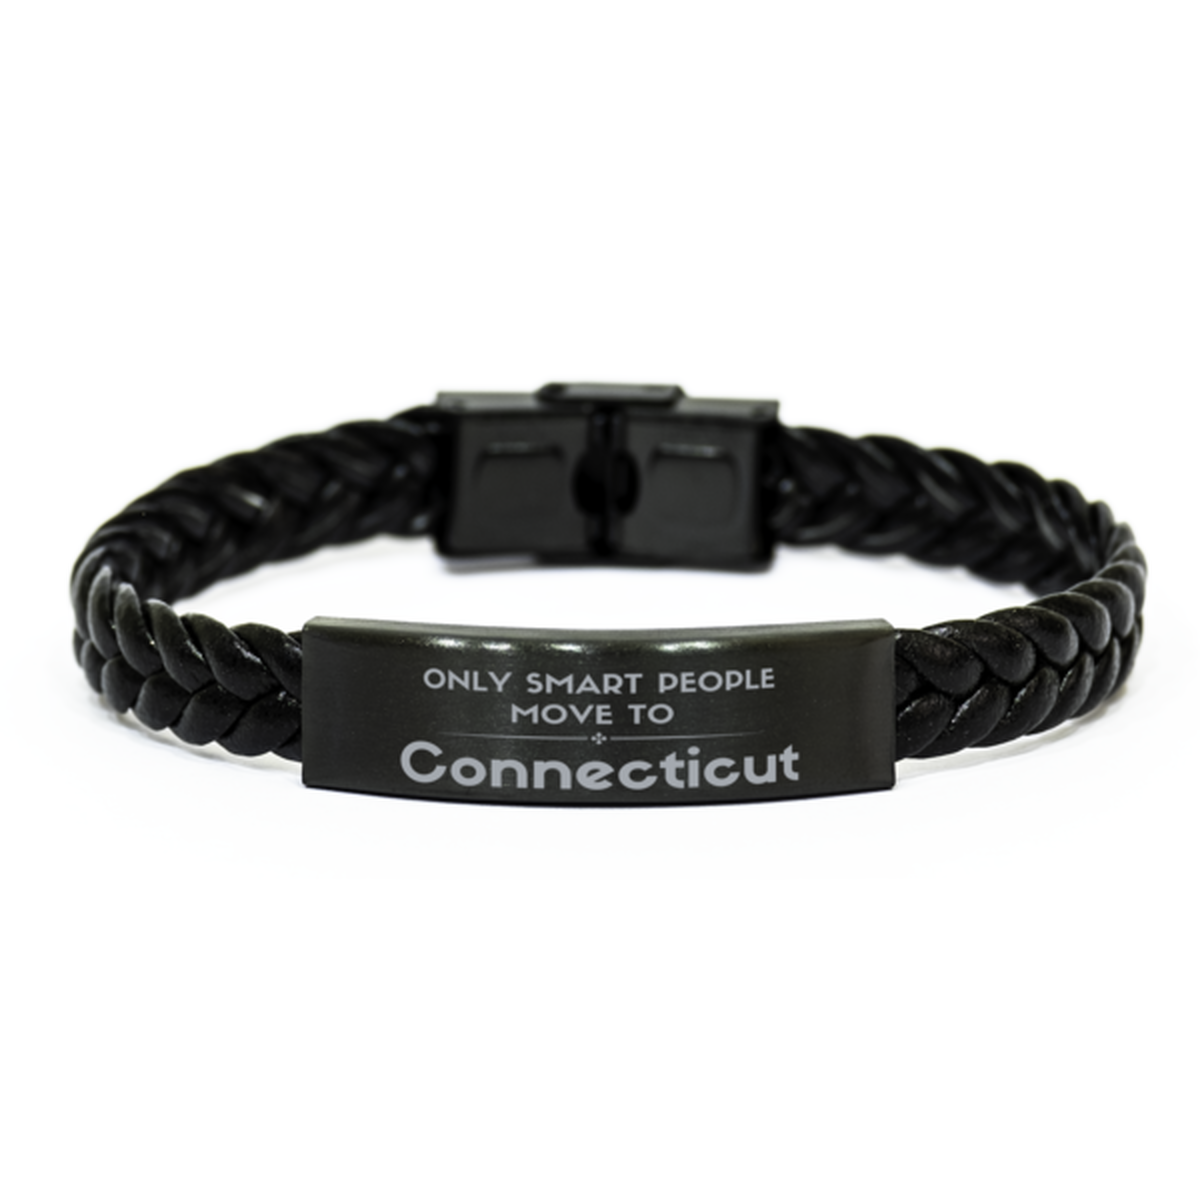 Only smart people move to Connecticut Braided Leather Bracelet, Gag Gifts For Connecticut, Move to Connecticut Gifts for Friends Coworker Funny Saying Quote